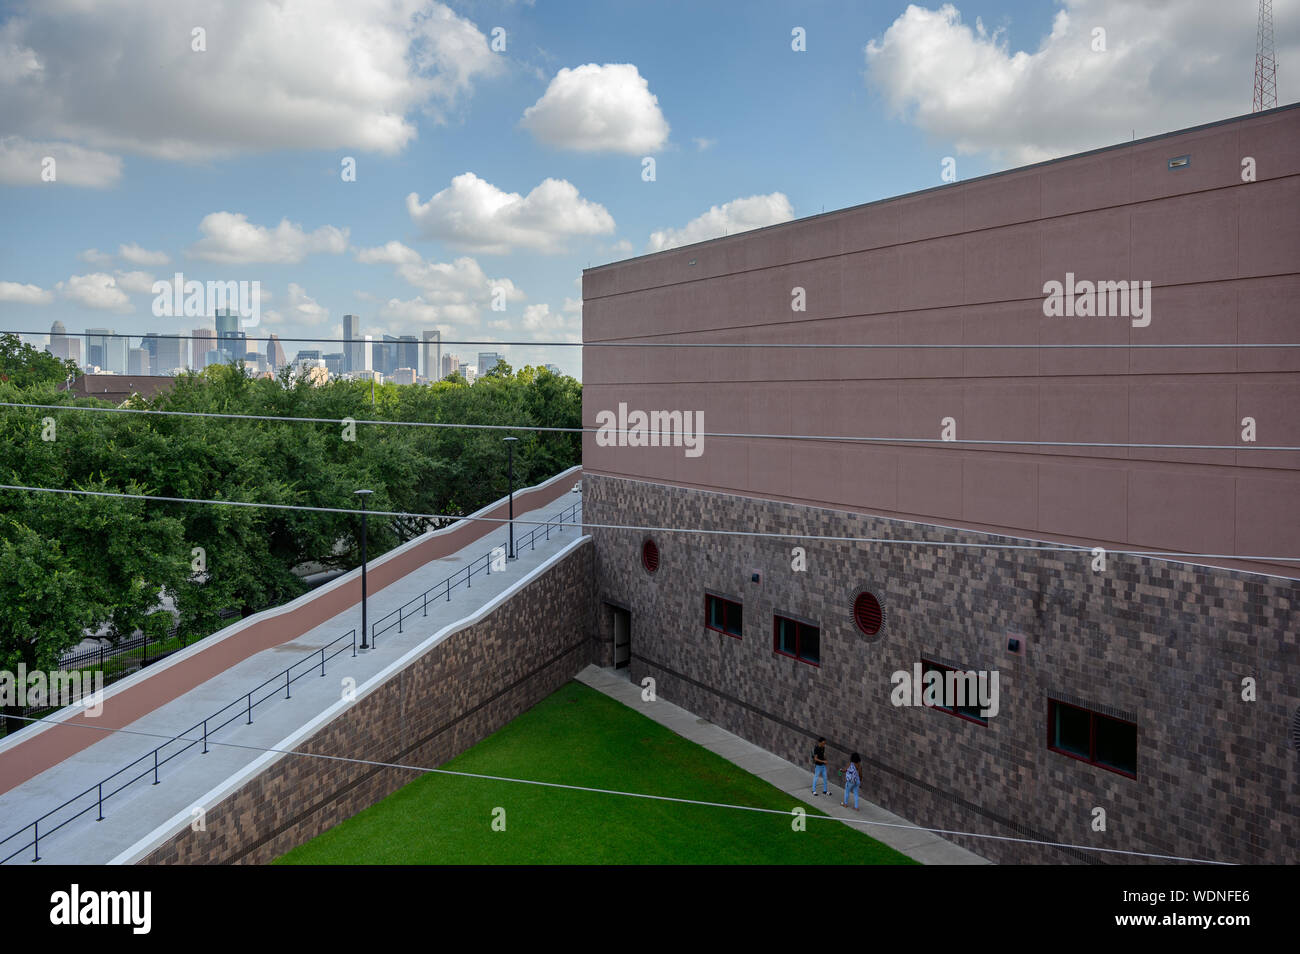 Houston, Texas - August 29, 2019: Health and Physical Education Arena at the Texas Southern University. Houston skyline in the distance. Stock Photo